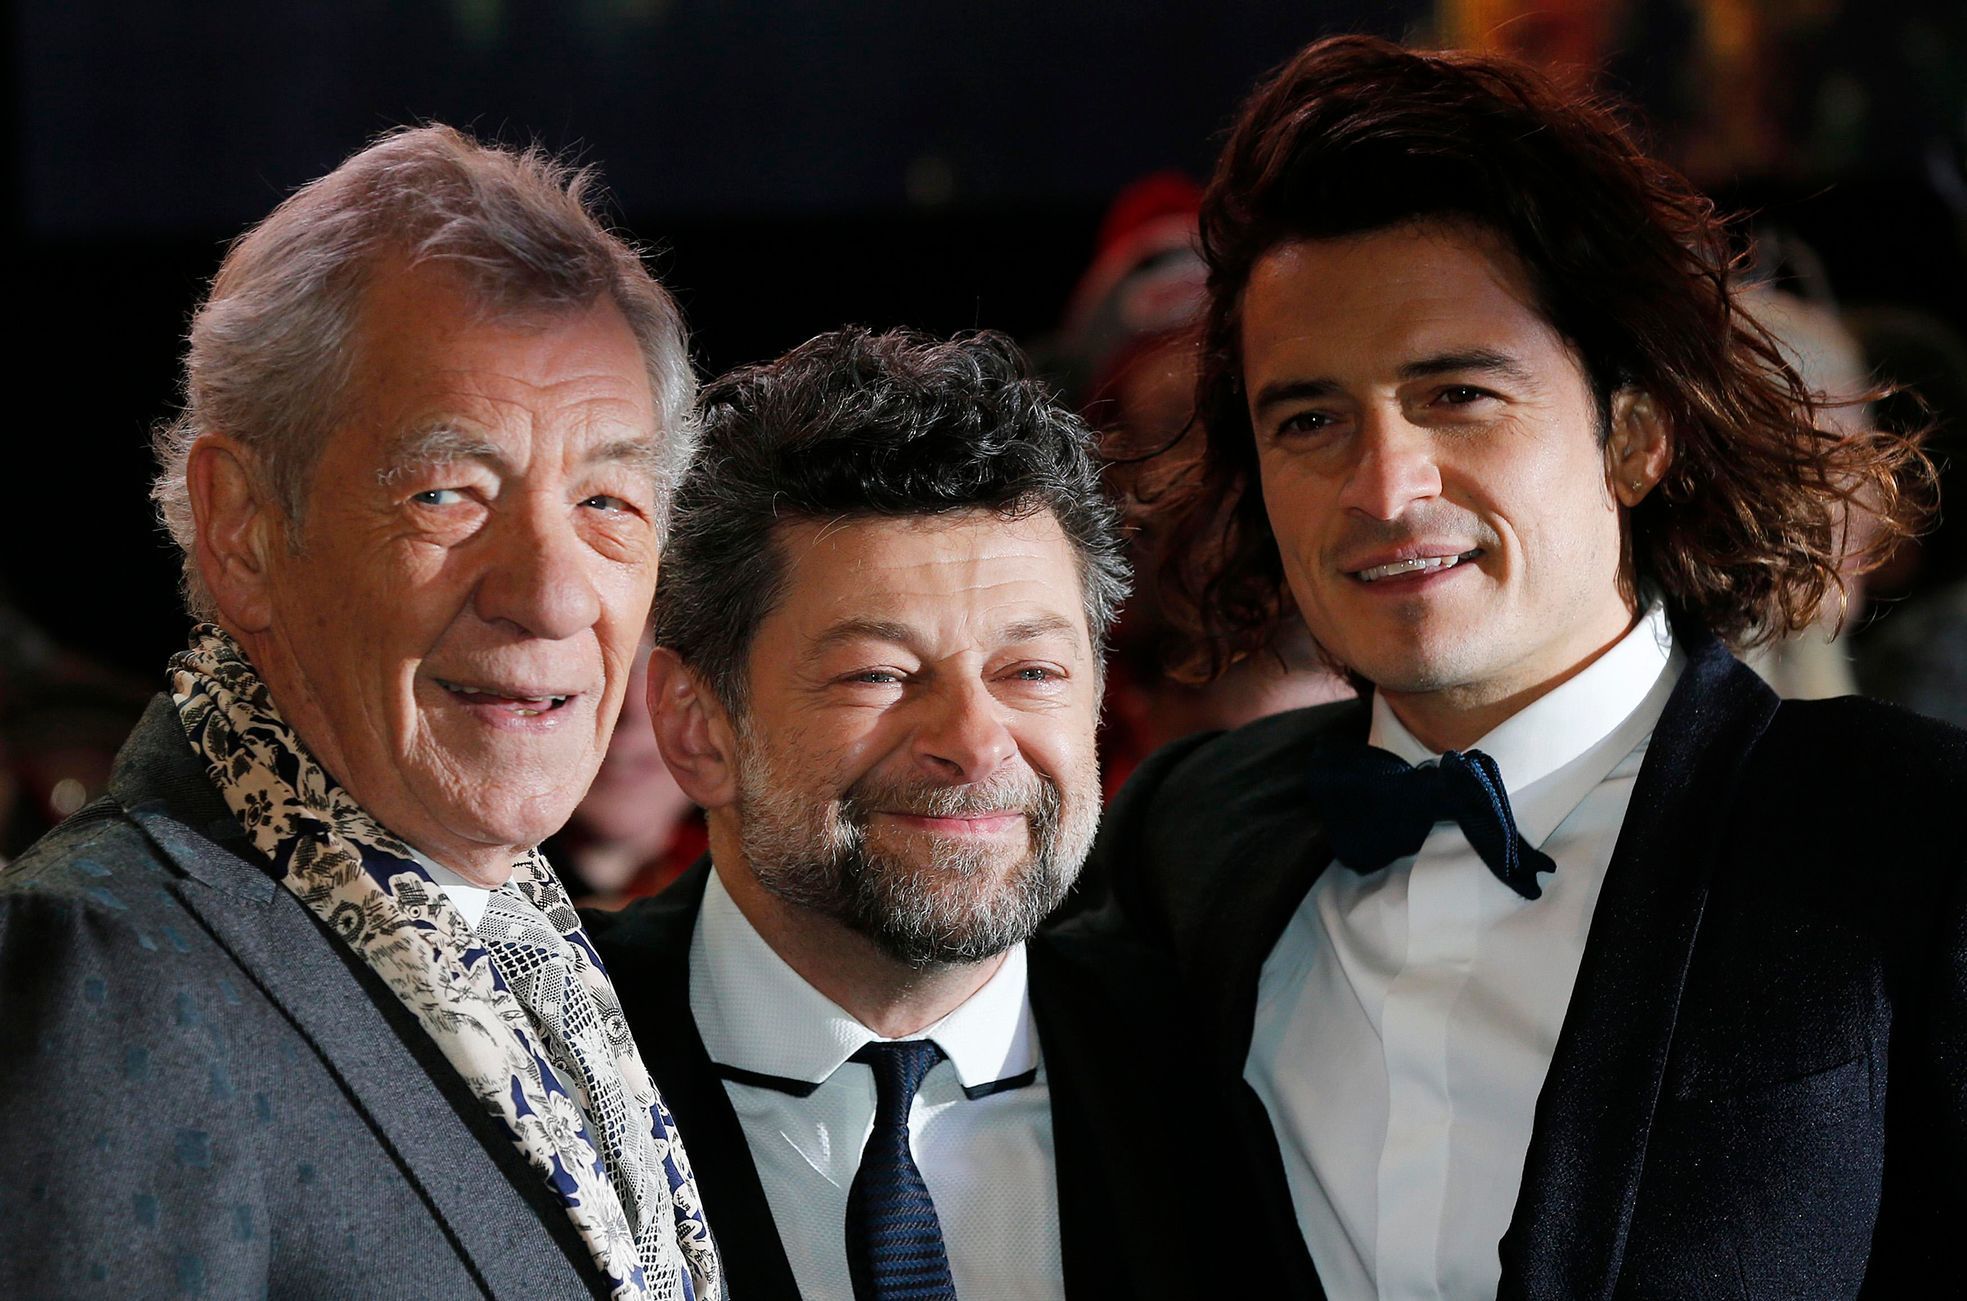 Cast members McKellen and Bloom pose for photographers with second unit director Serkis as they arrive for the world film premiere of &quot;The Hobbit: The Battle of the Five Armies&quot; at Leicester